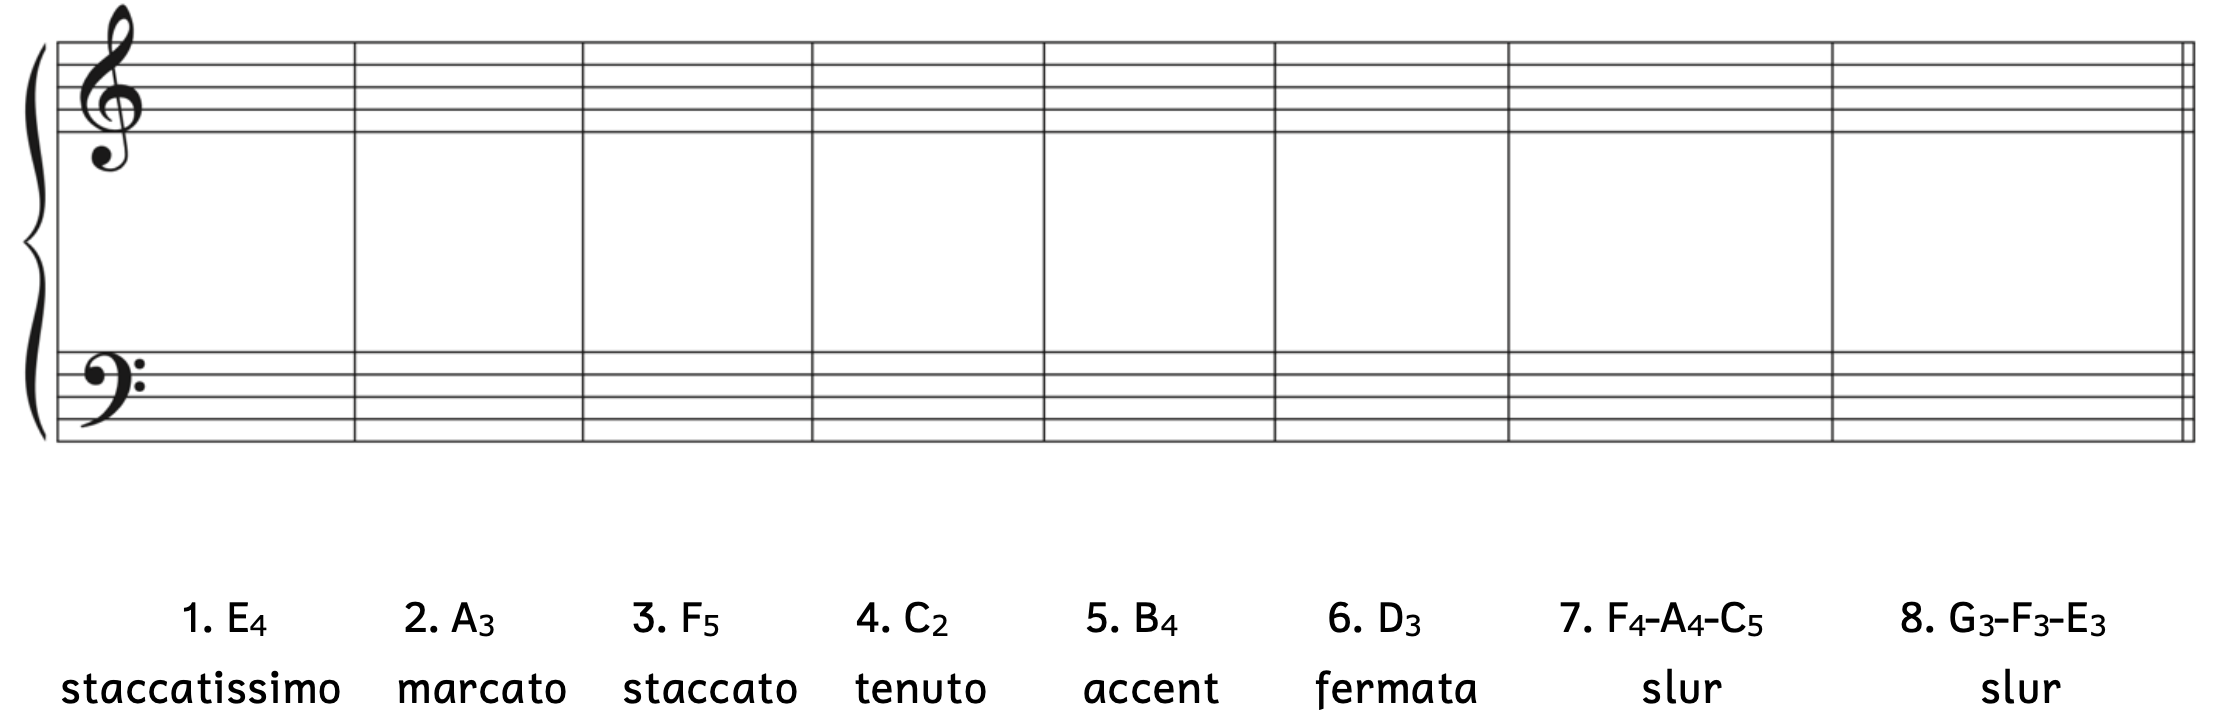 Exercises asking to write different types of articulation marks on given notes on a grand staff. Number 1 asks for E4 with staccatissimo. Number 2 asks for A3 with marcato. Number 3 asks for F5 with staccato. Number 4 asks for C2 with tenuto. Number 5 asks for B4 with accent. Number 6 asks for D3 with fermata. Number 7 asks for F4, A4, and C5 with a slur. Number 8 asks for G3, F3, and E3 with a slur.